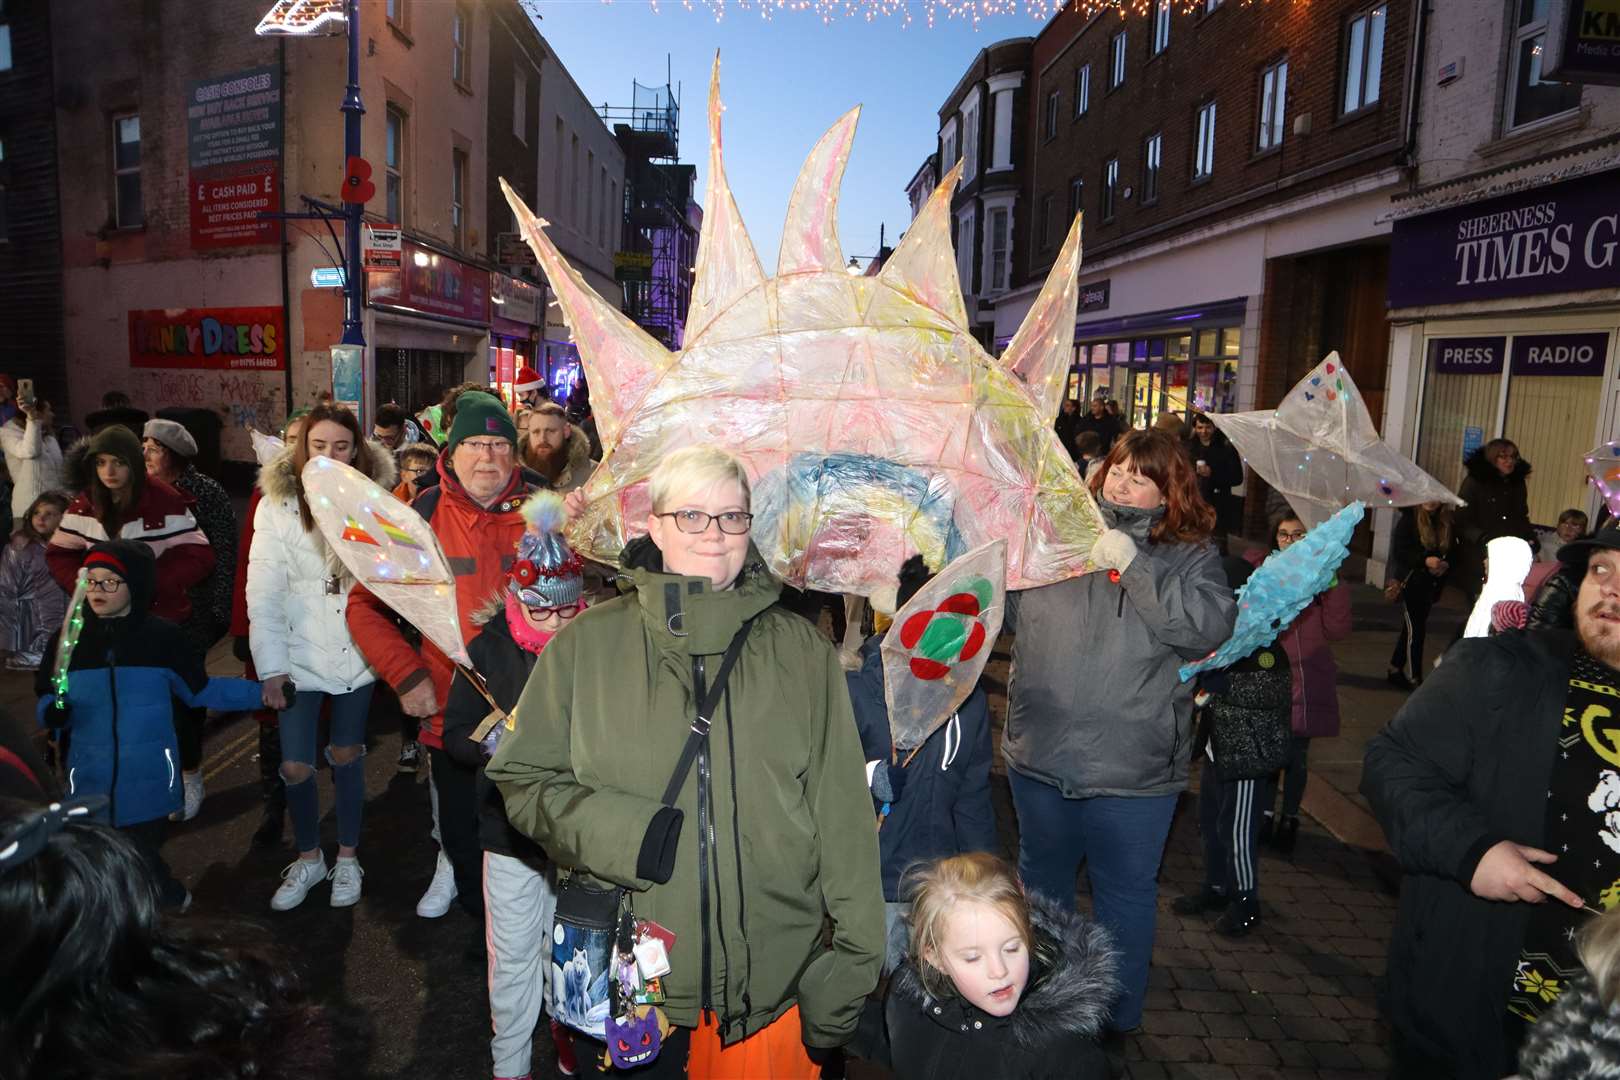 More than 200 lights were made for the Sheerness lantern parade on Saturday